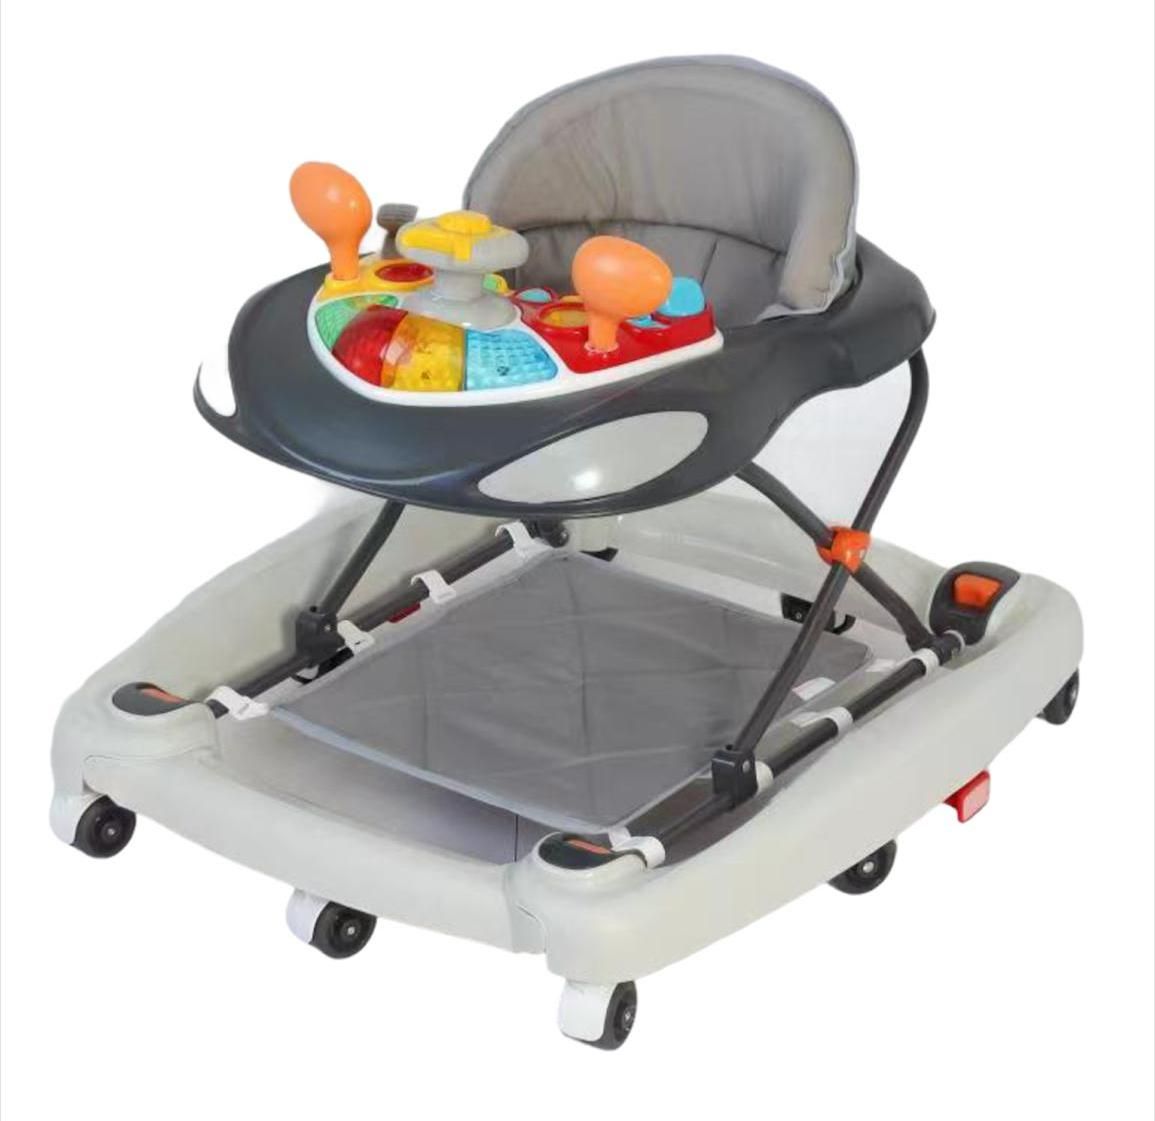 Infantes 8855 Baby Walker 2 in 1 Walk and Ride CHECK SUPER CAR